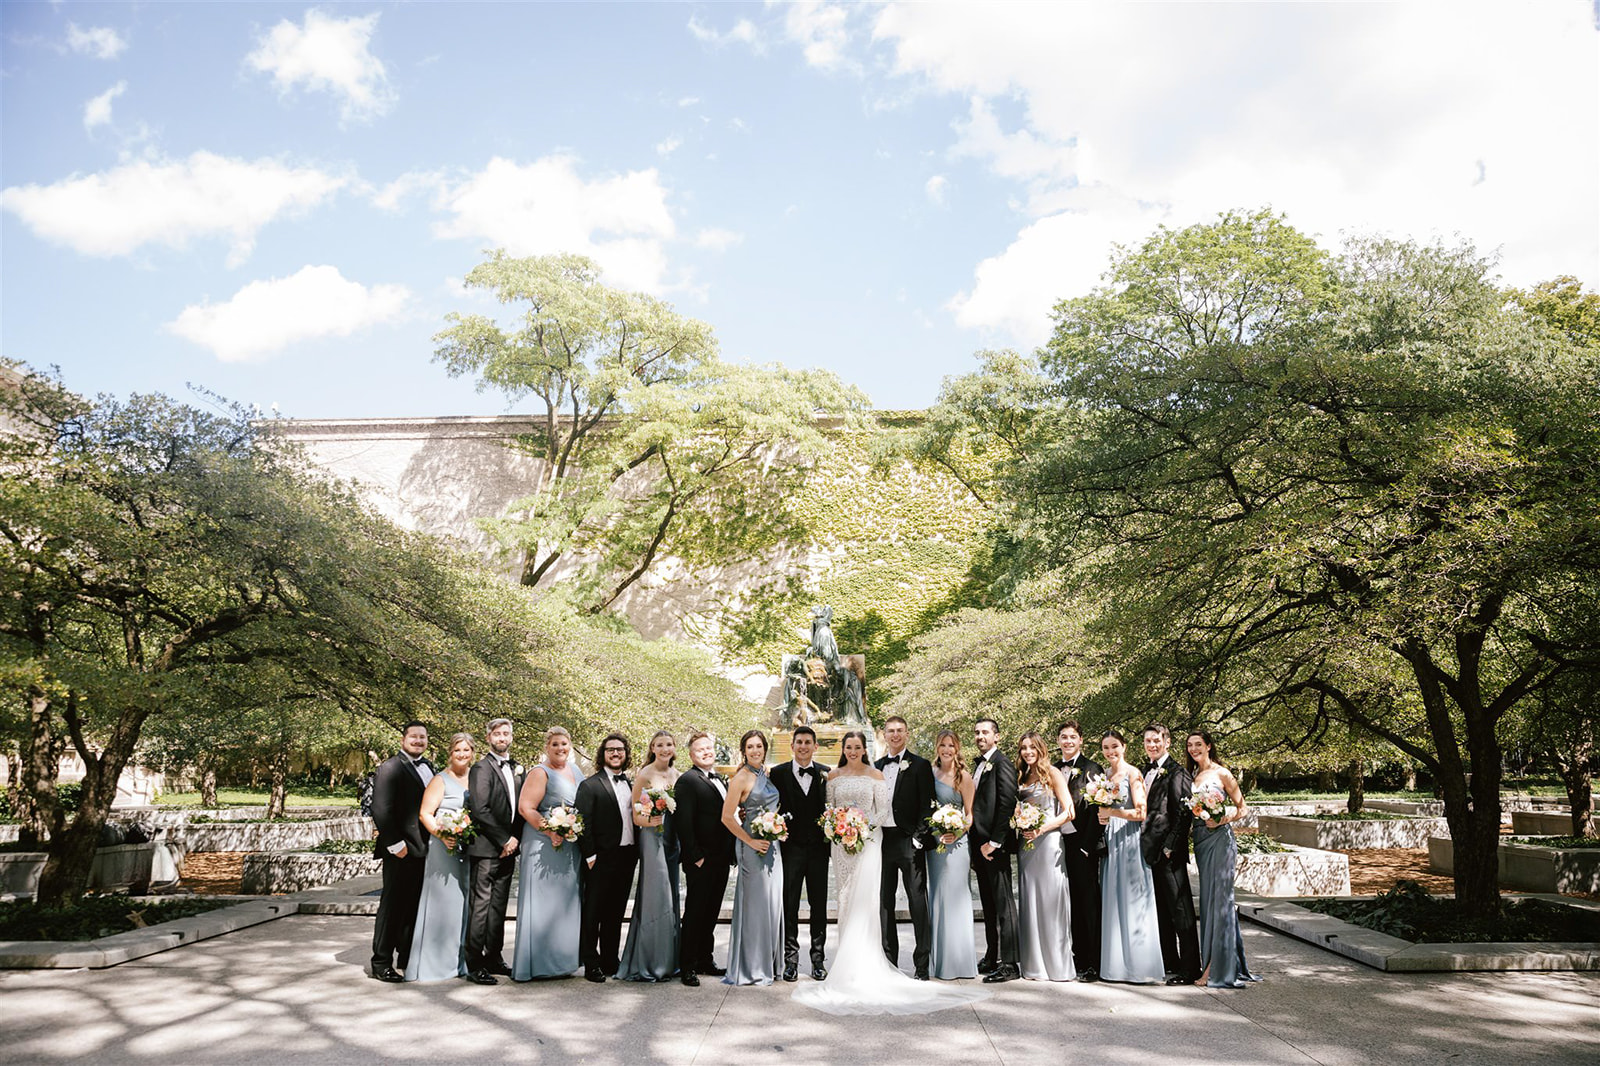 Amidst Chicago's Art Institute gardens, a picturesque gathering of the wedding party unfolds in elegant splendor.